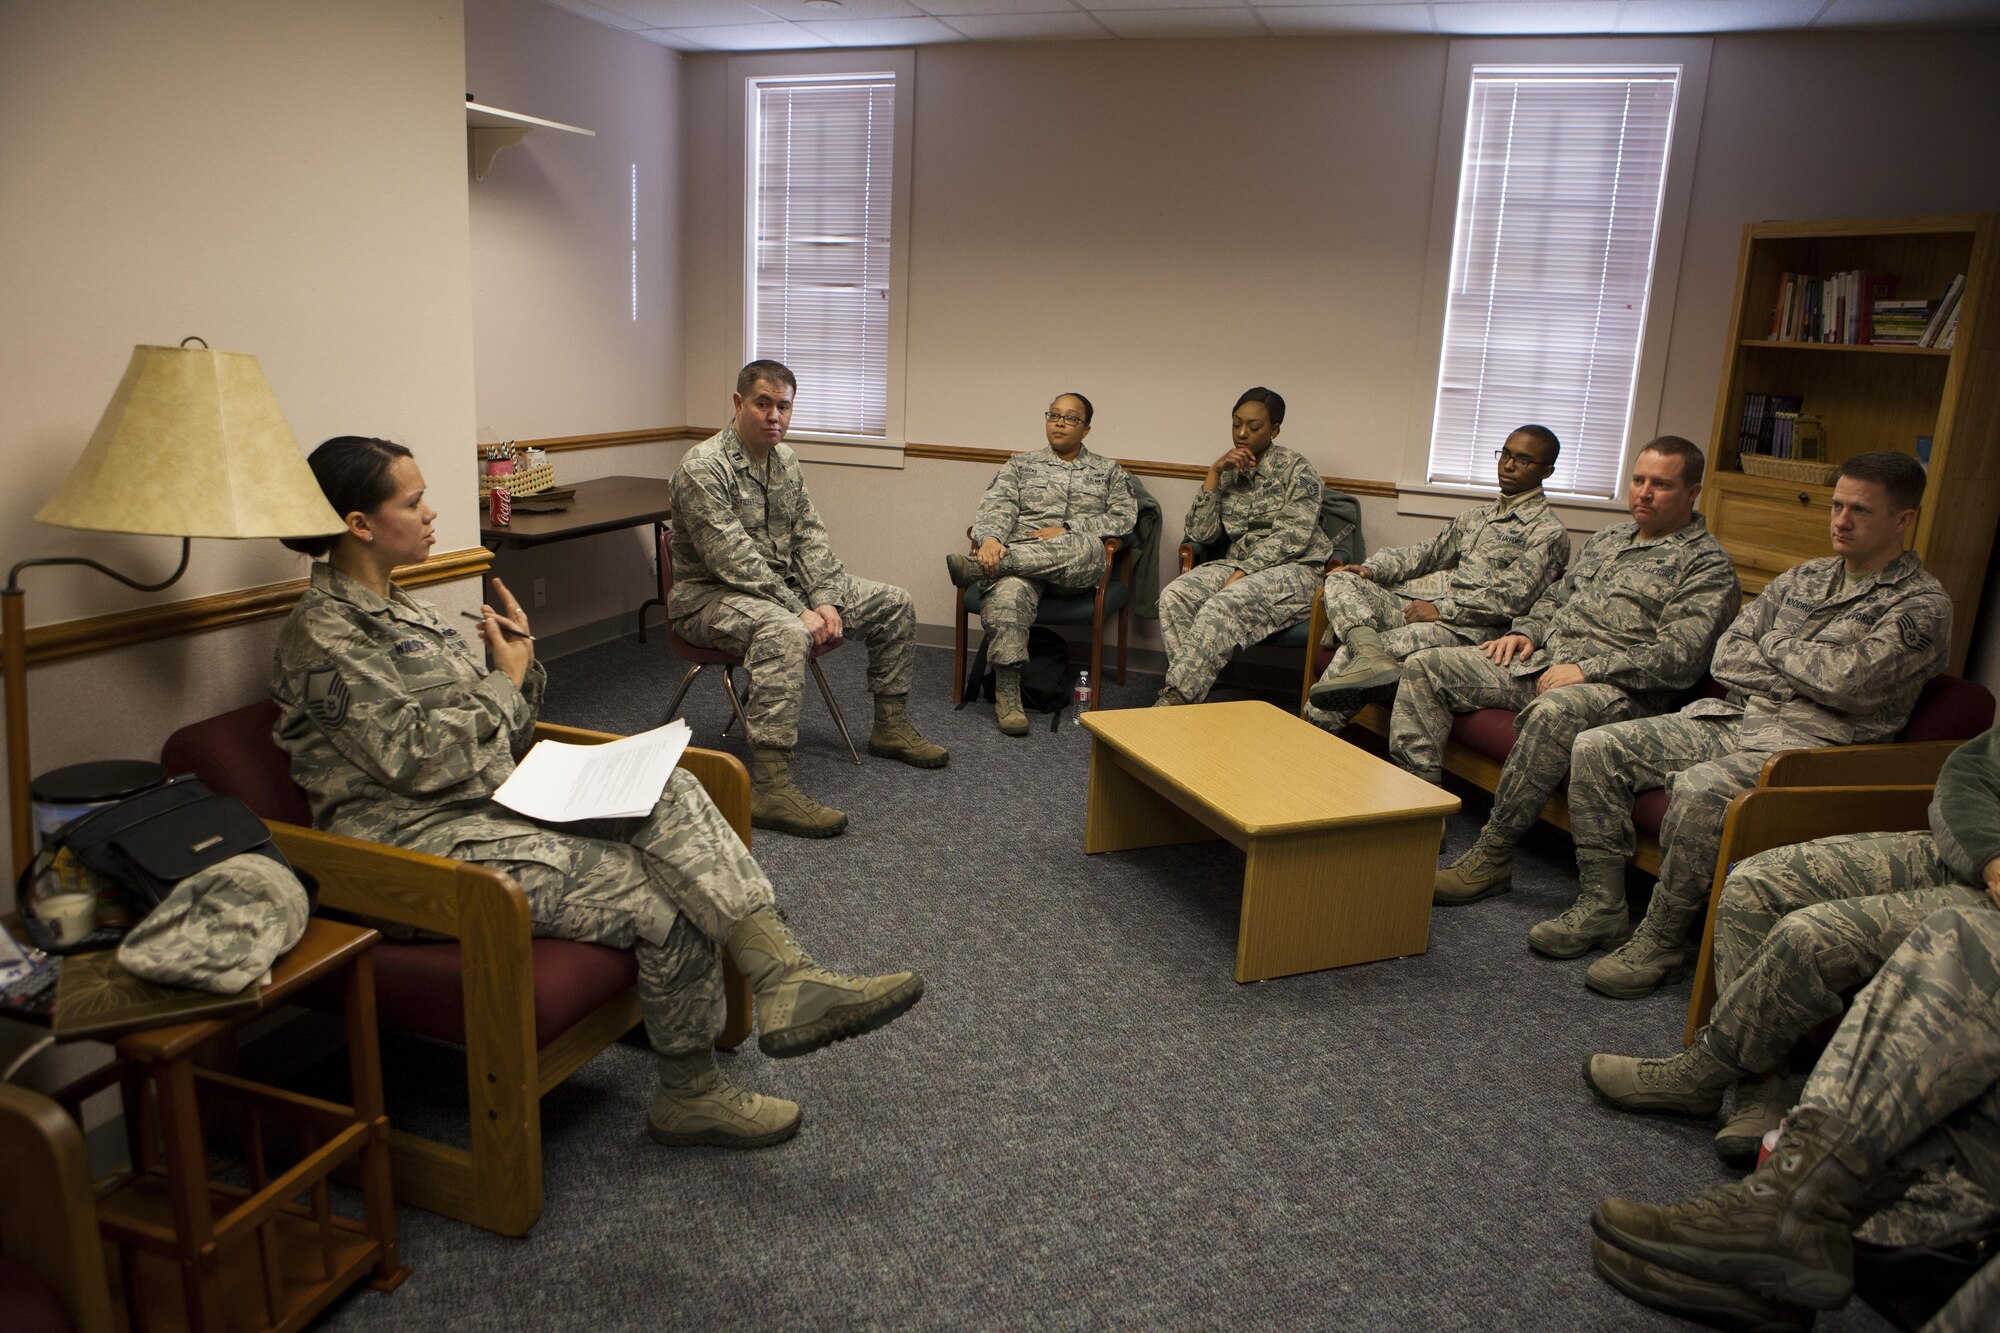 MSgt. Gloria Wilson, 90th Missile Wing Public Affairs superintendant, discusses a safety scenario with a group of wing staff personnel on F.E. Warren Air Force Base, Wyo., Jan. 11, 2016, during a 20th Air Force Safety Down-Day. The down day was part of a 20th Air Force wide initiative to reinforce safety as a high priority. (U.S. Air Force photo by Lan Kim)